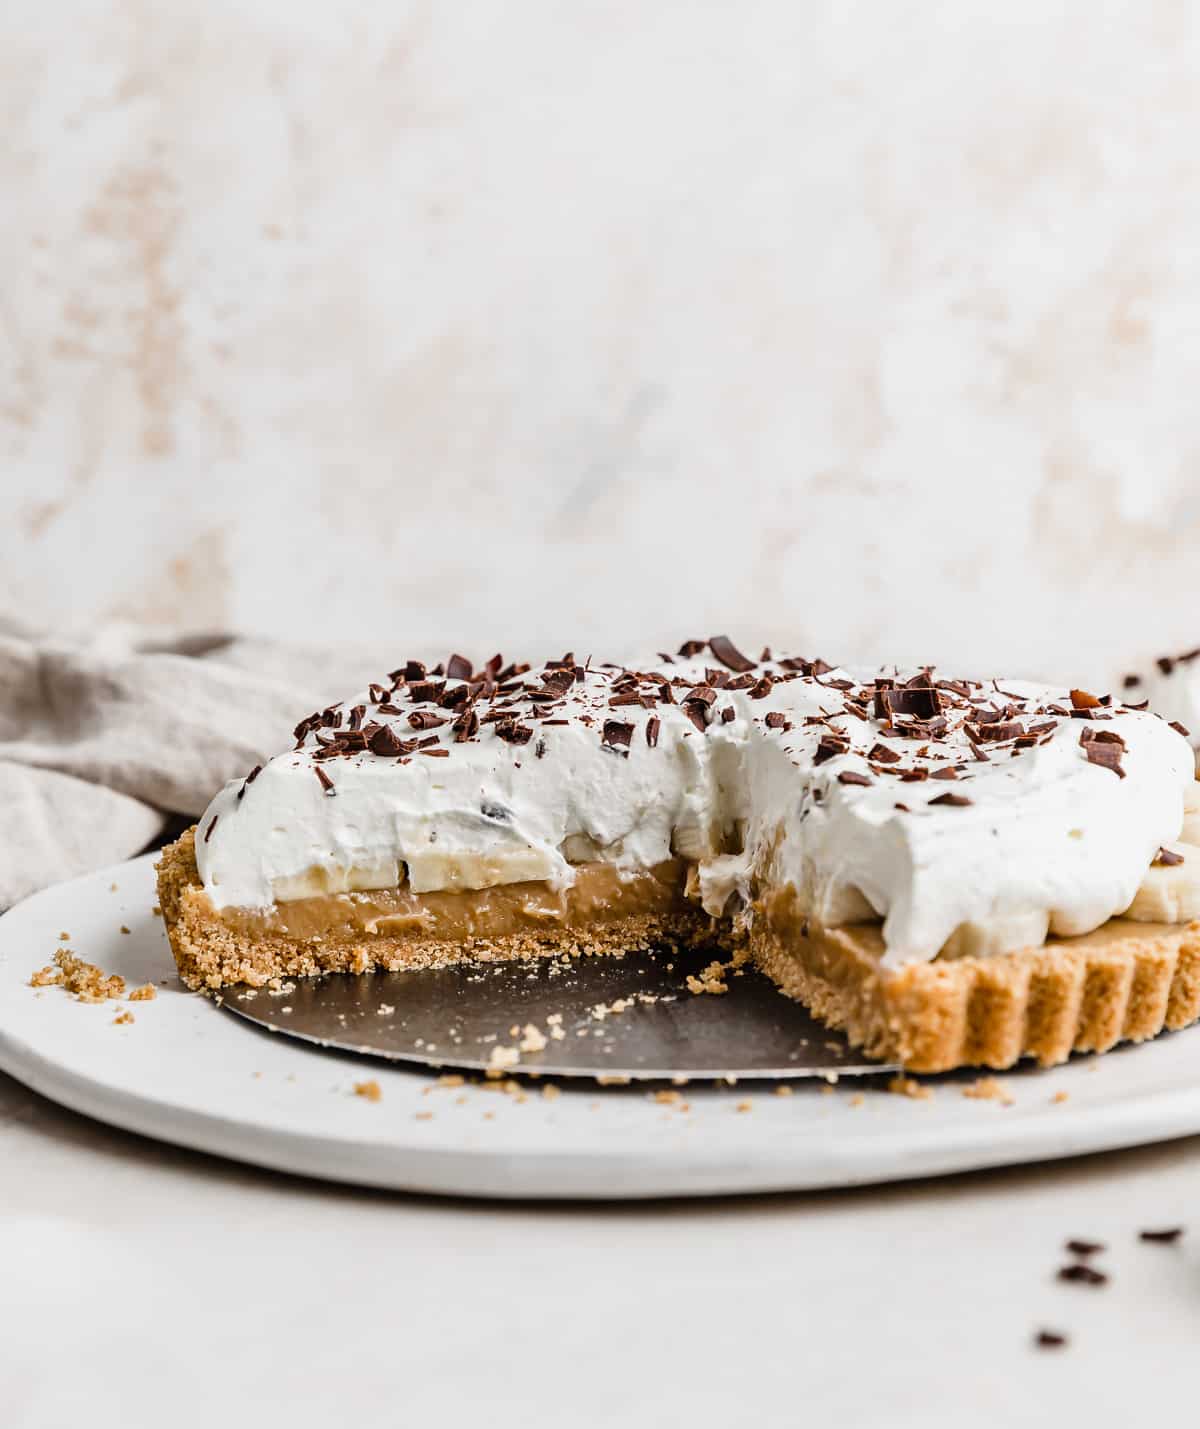 A Banoffee Pie on a white plate.